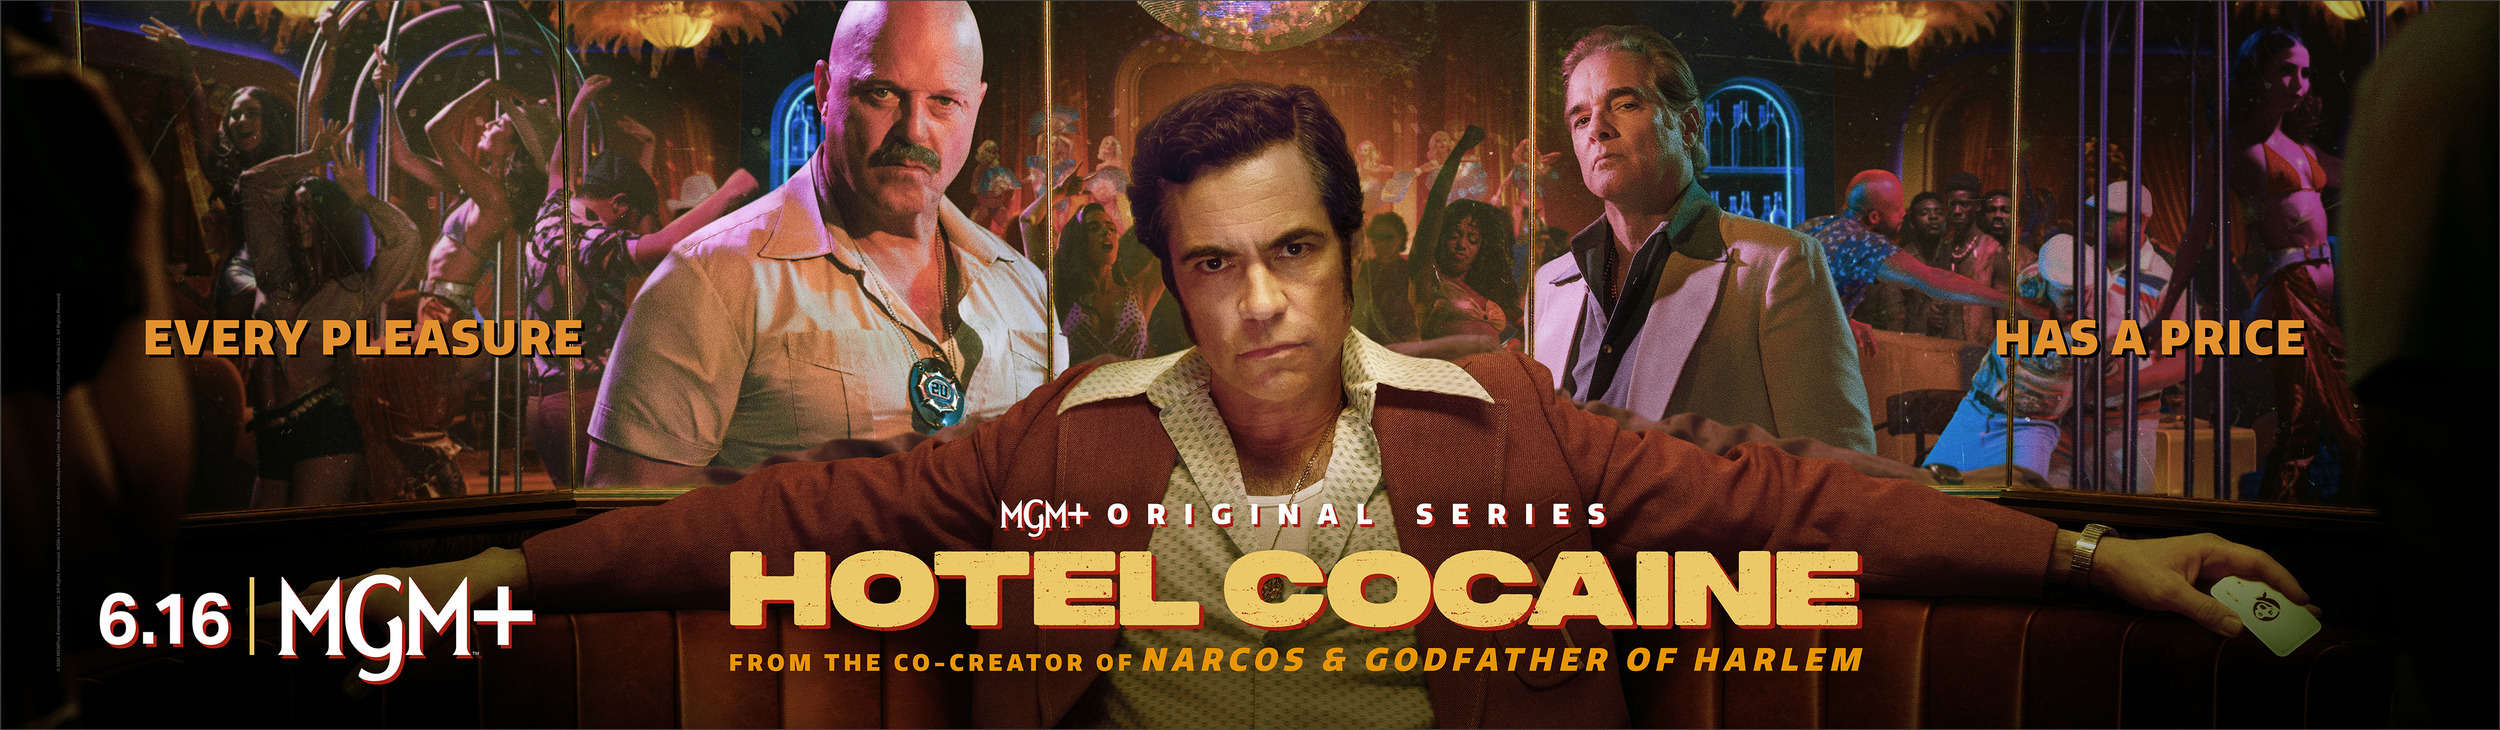 Mega Sized TV Poster Image for Hotel Cocaine (#2 of 2)